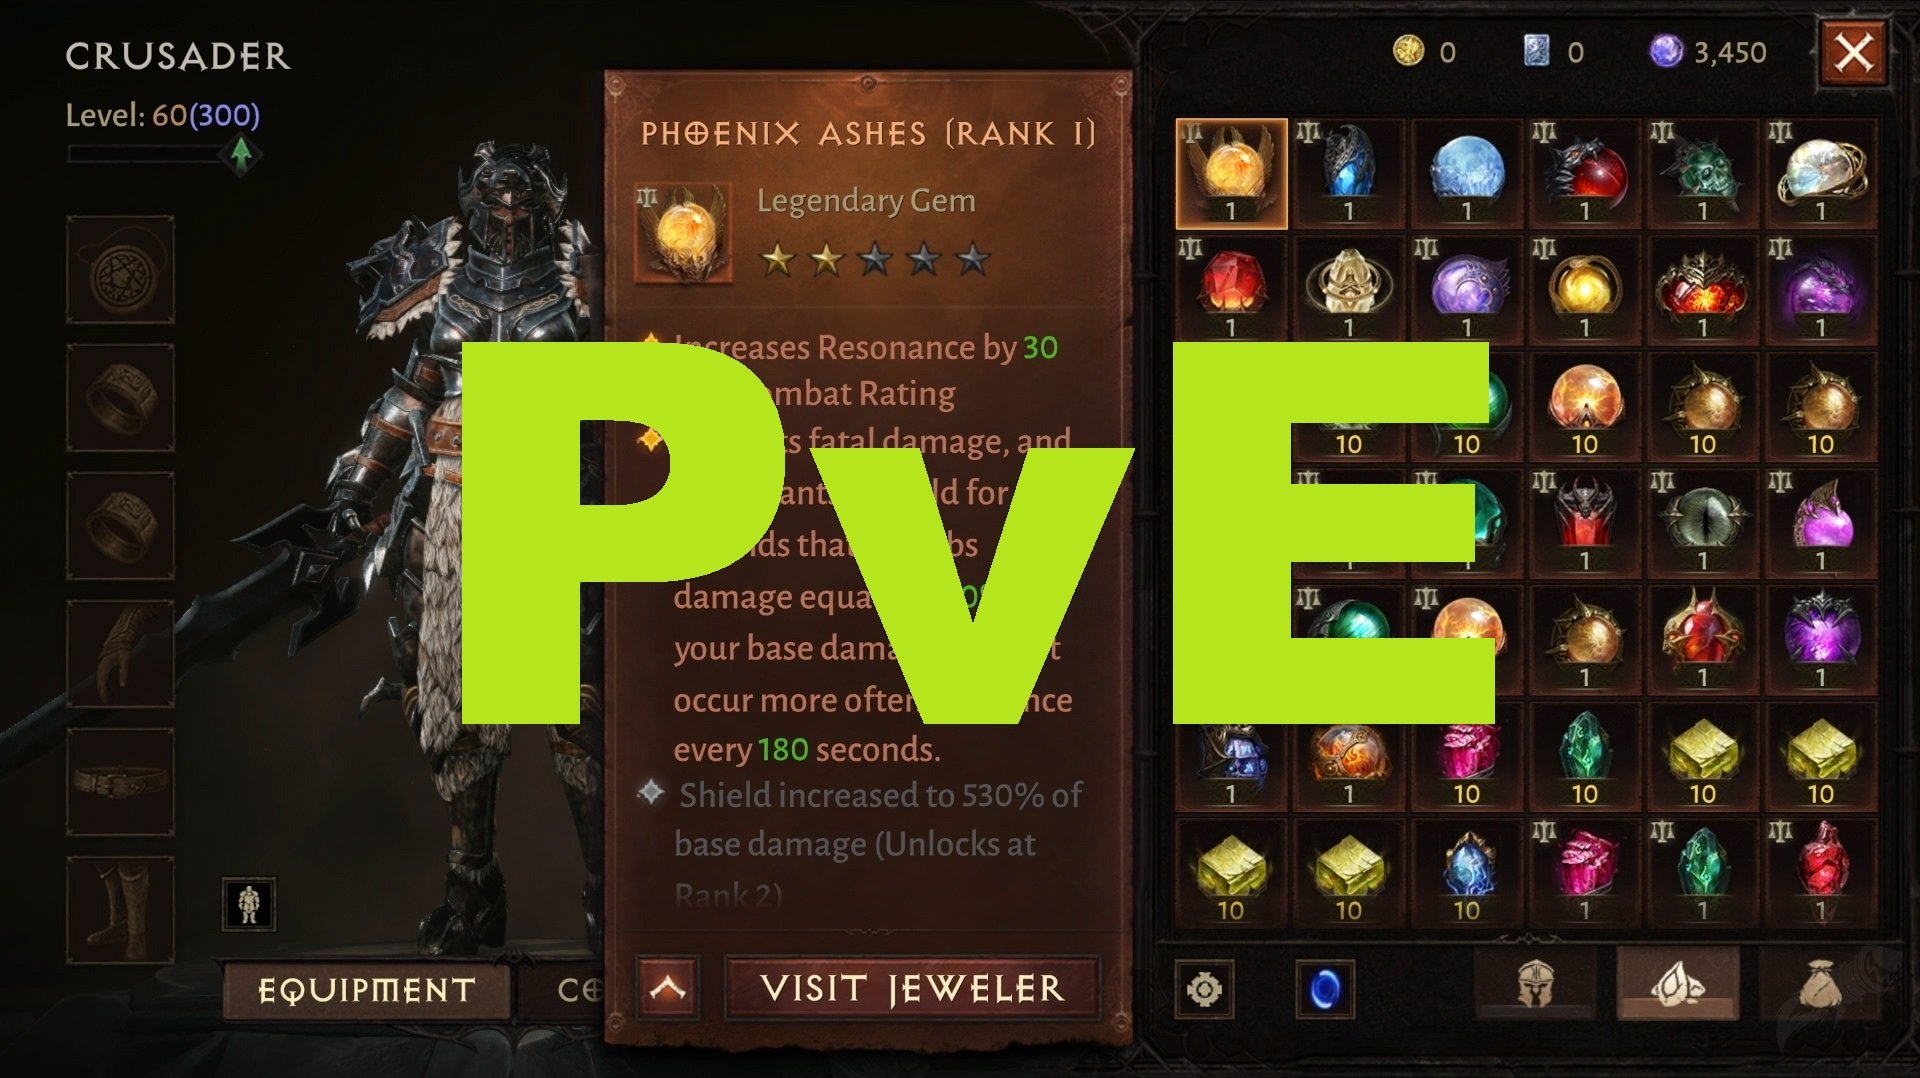 Diablo Immortal tier list: Best character classes for PVP and PVE